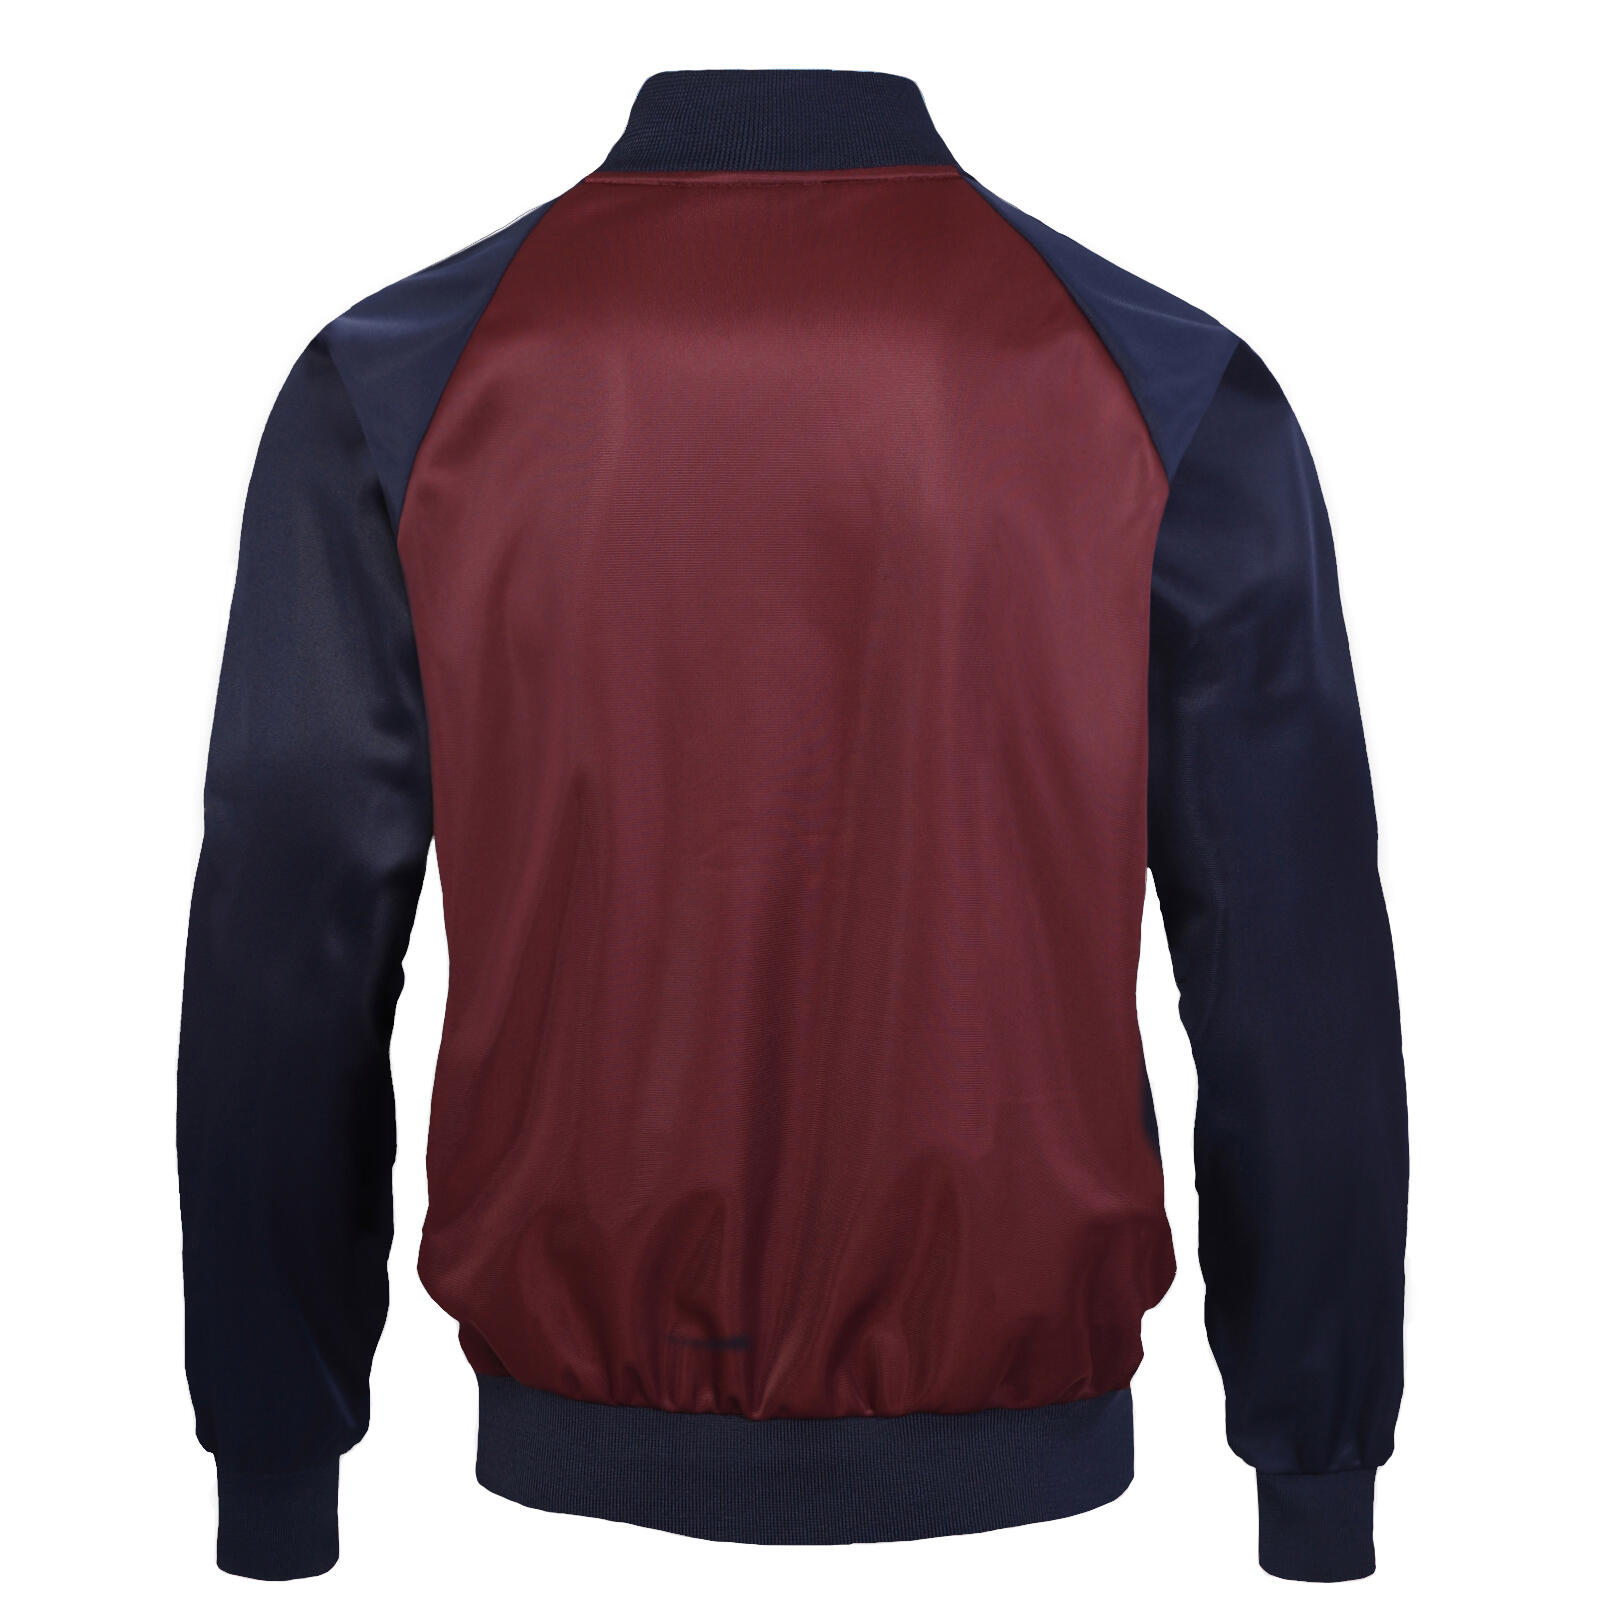 West Ham United Mens Jacket Track Top Retro OFFICIAL Football Gift 3/3